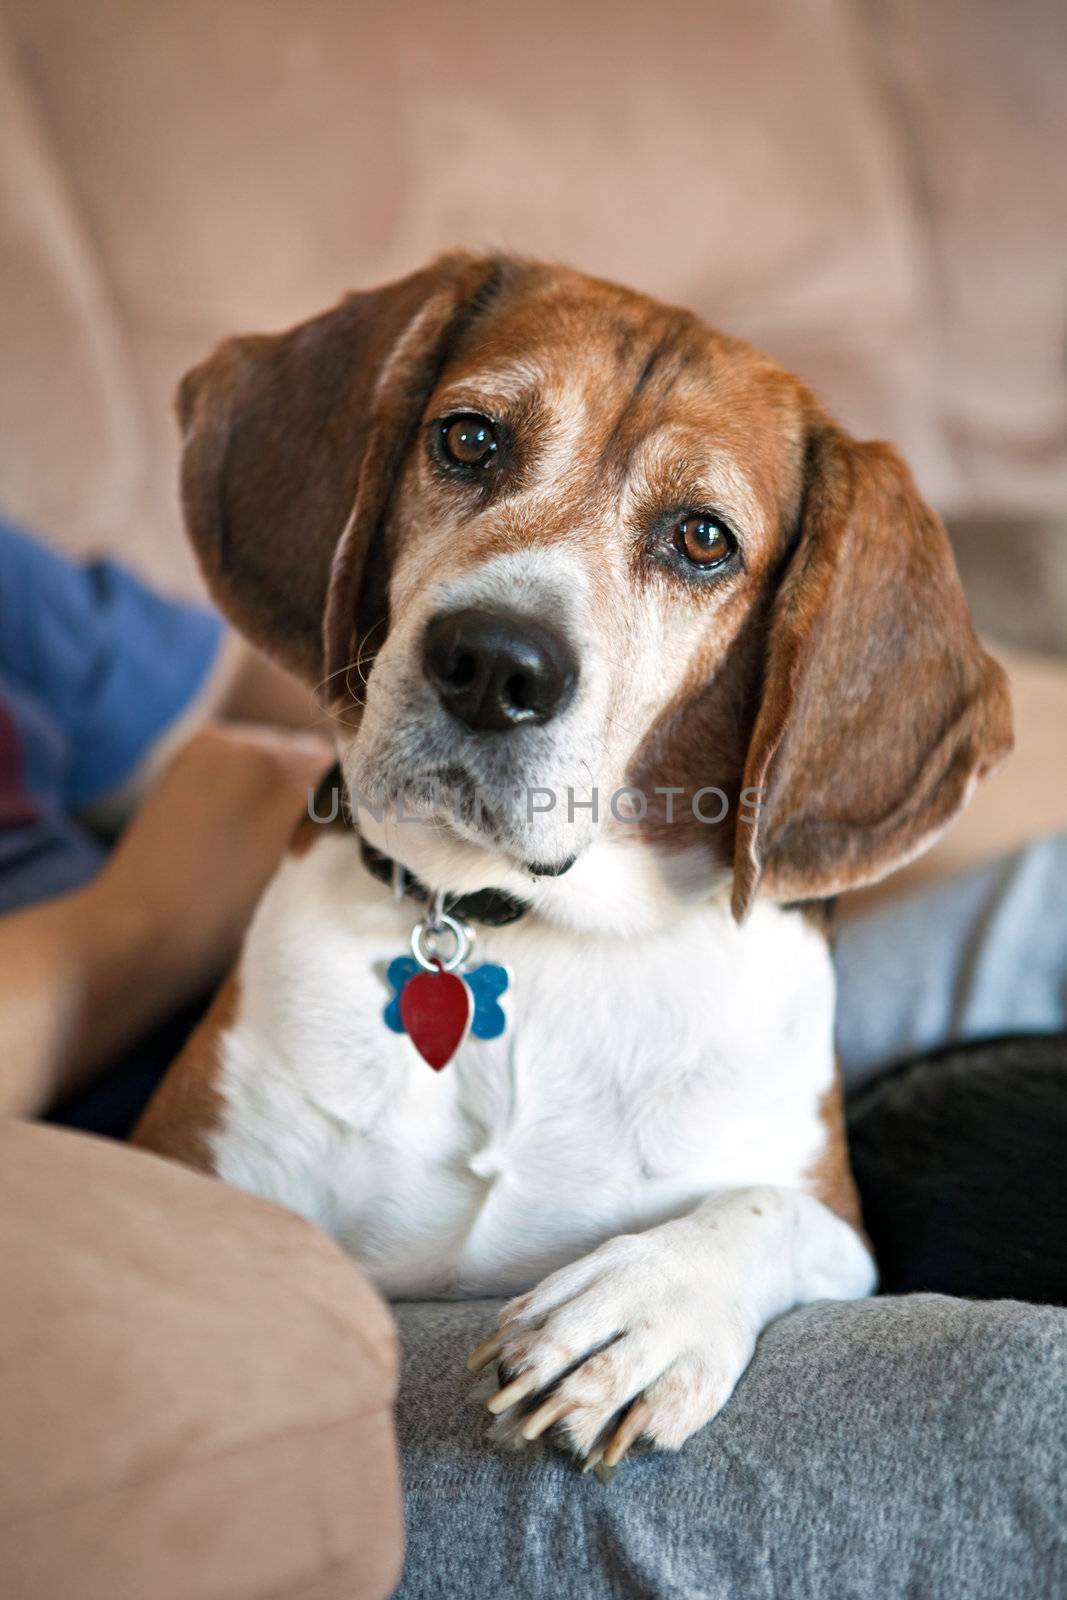 Cute beagle dog looking at the viewer.  Shallow depth of field.